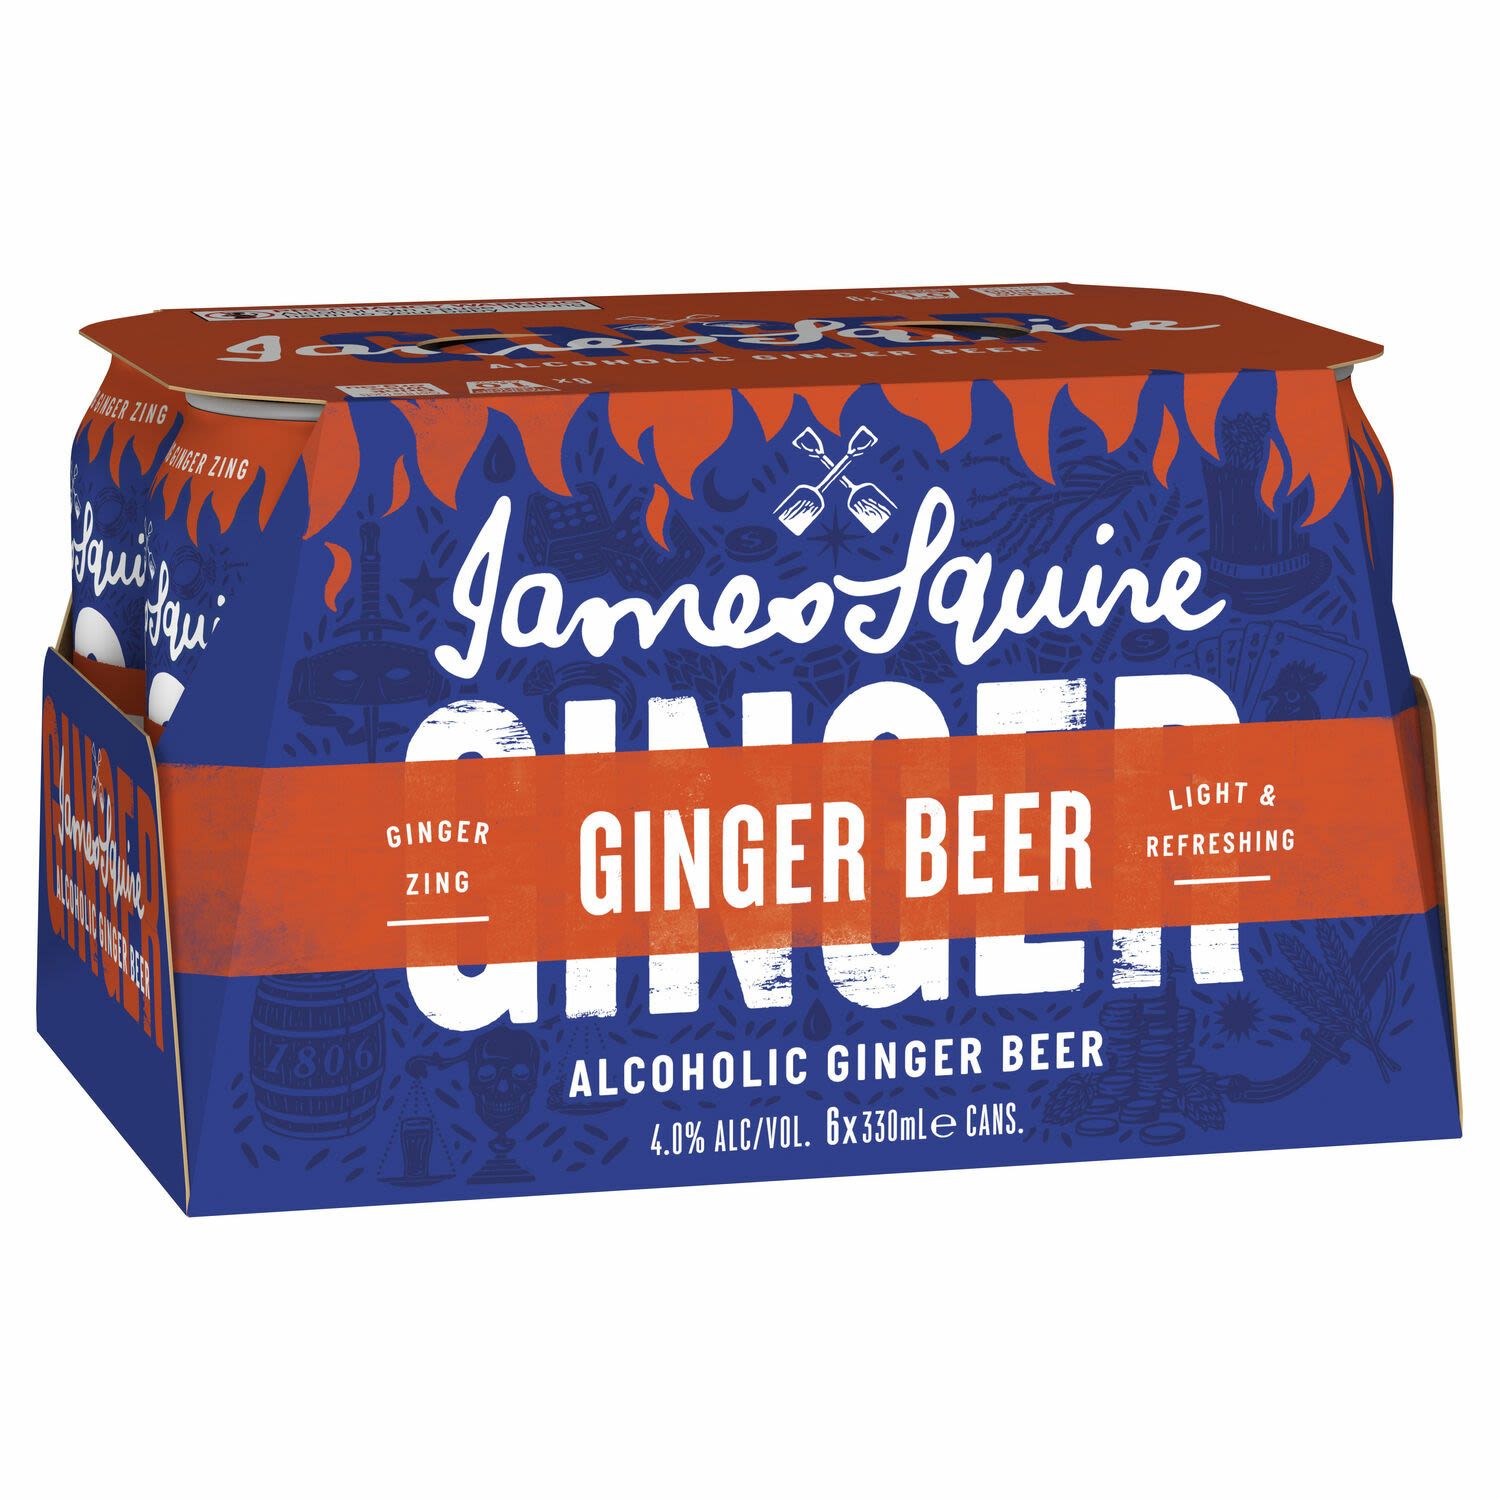 James Squire Ginger Beer has been carefully crafted with Australian ginger for a light, refreshing and zingy ginger taste. It can be enjoyed straight from the can or over ice with fresh lime.<br /> <br />Alcohol Volume: 4.00%<br /><br />Pack Format: 6 Pack<br /><br />Standard Drinks: 1</br /><br />Pack Type: Can<br /><br />Country of Origin: Australia<br />